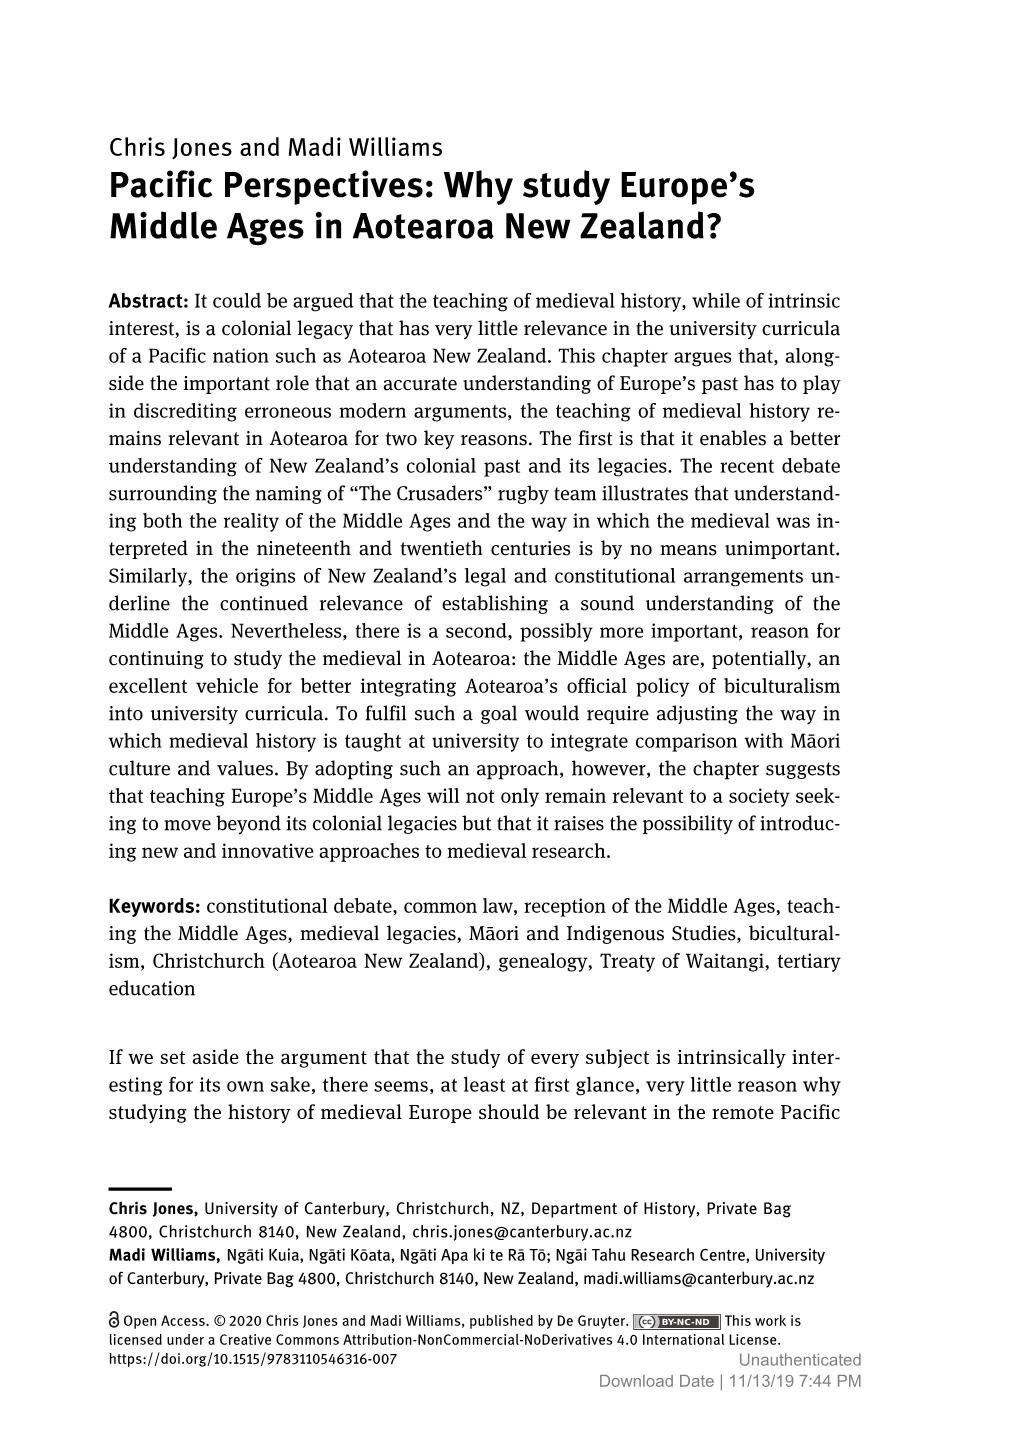 Pacific Perspectives: Why Study Europe’S Middle Ages in Aotearoa New Zealand?